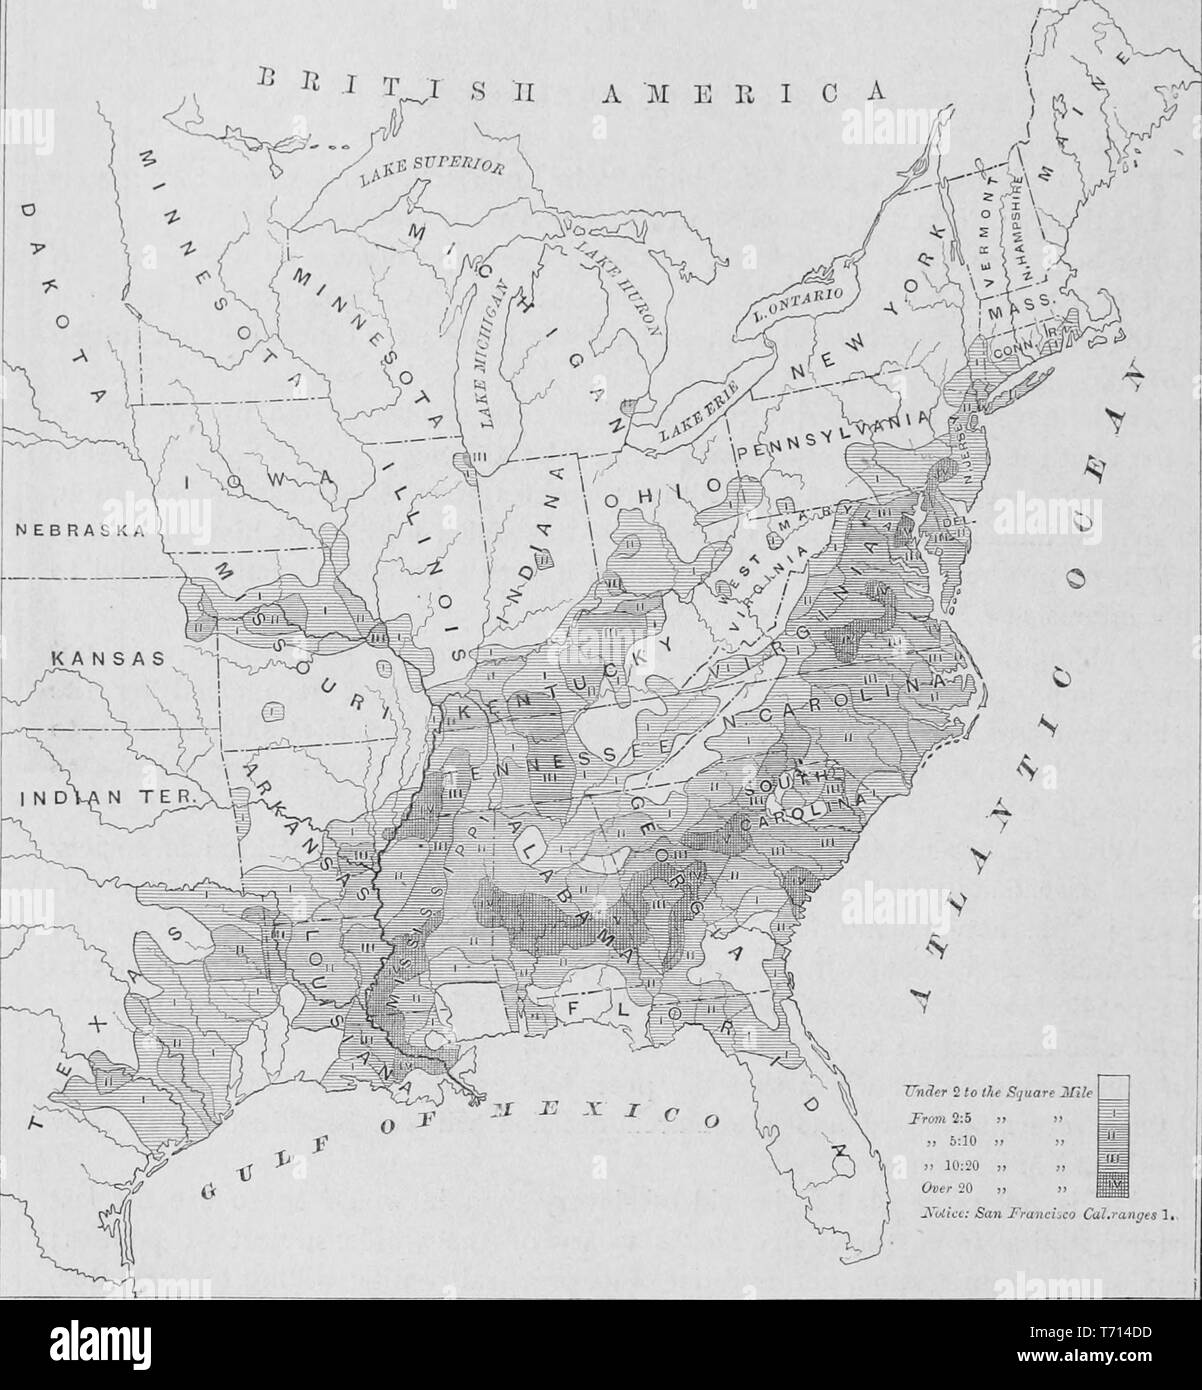 Illustrated map of the distribution of the African-American population of the United States, from the book 'The Southern states of North America' by Edward King, 1875. Courtesy Internet Archive. () Stock Photo